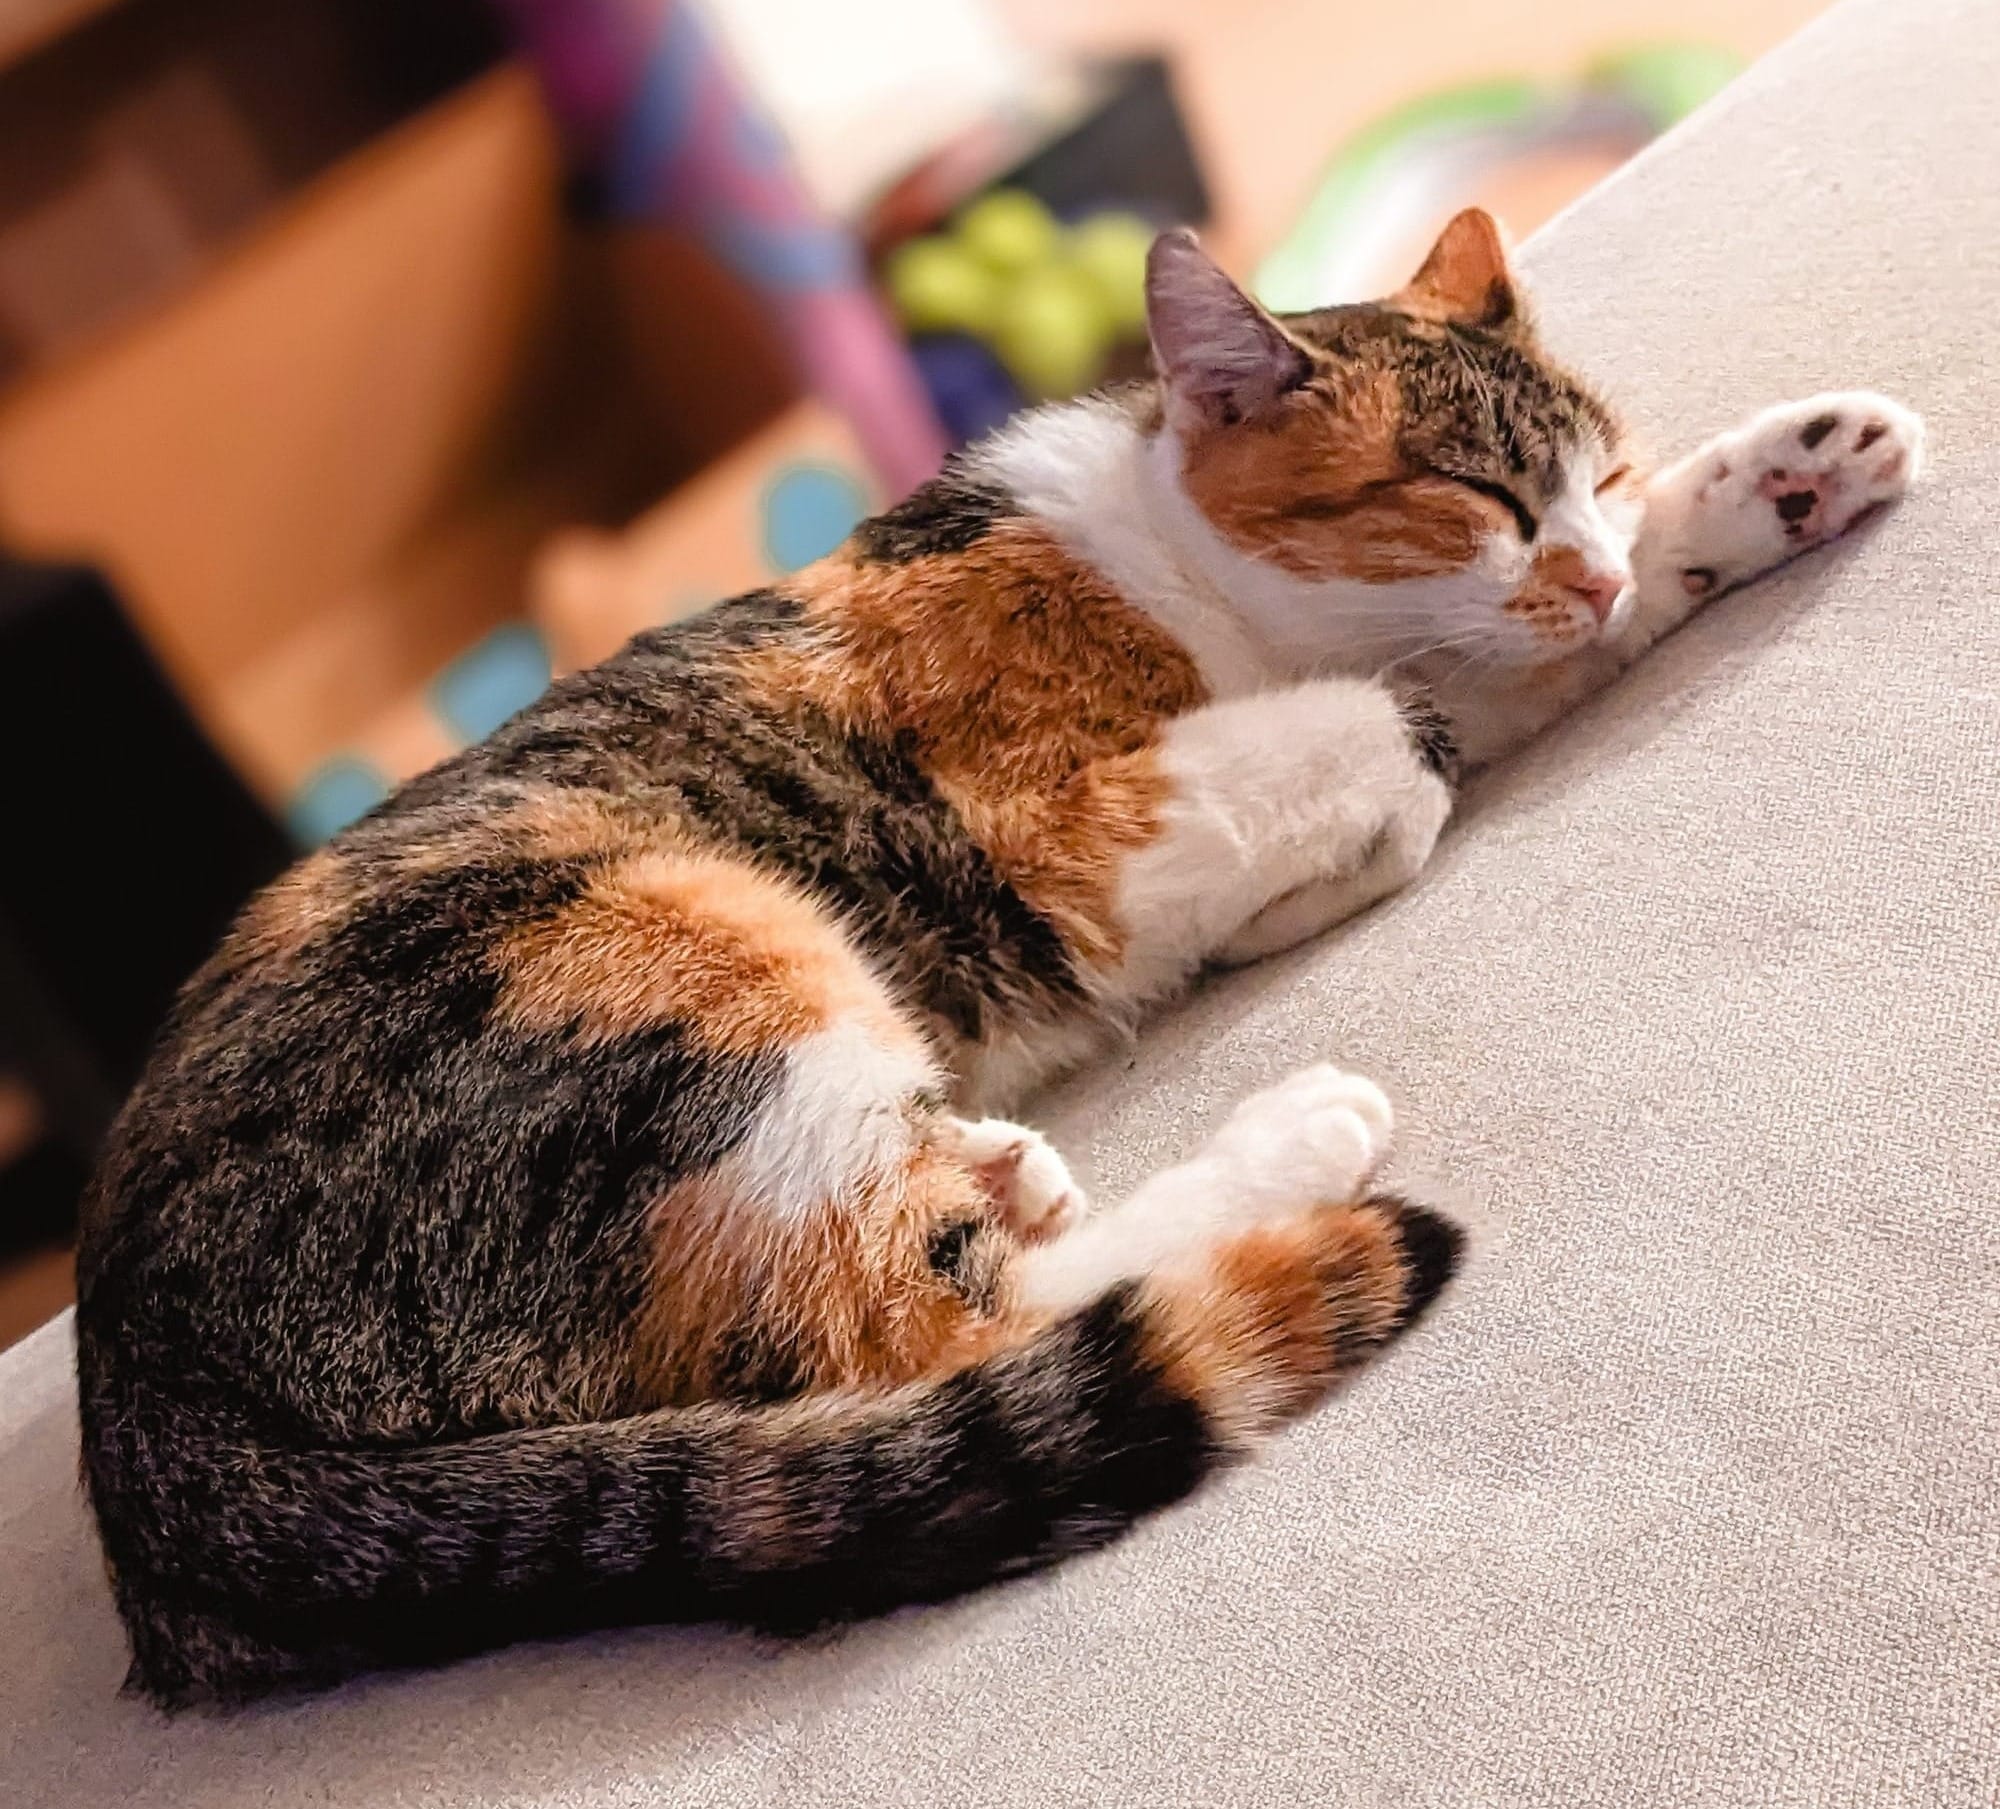 A photo of a calico cat lying on a grey couch. Her head is resting on her outstretched paw, and that paw has both pink and black spots on the toe beans.